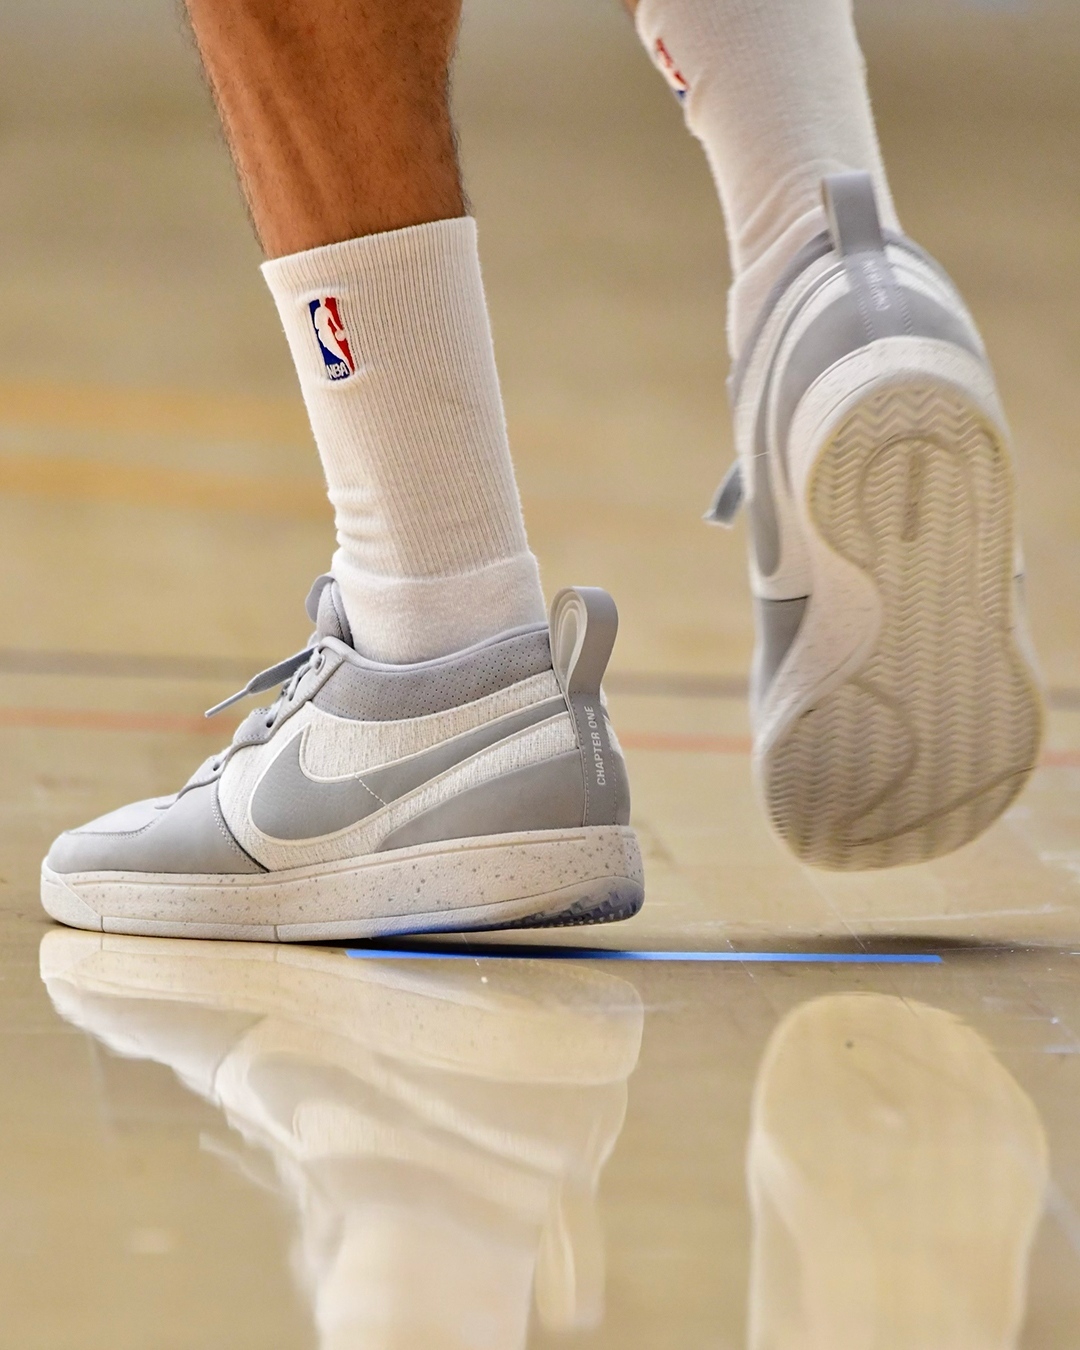 Devin Booker in the nike navy Book 1 "Cool Grey"